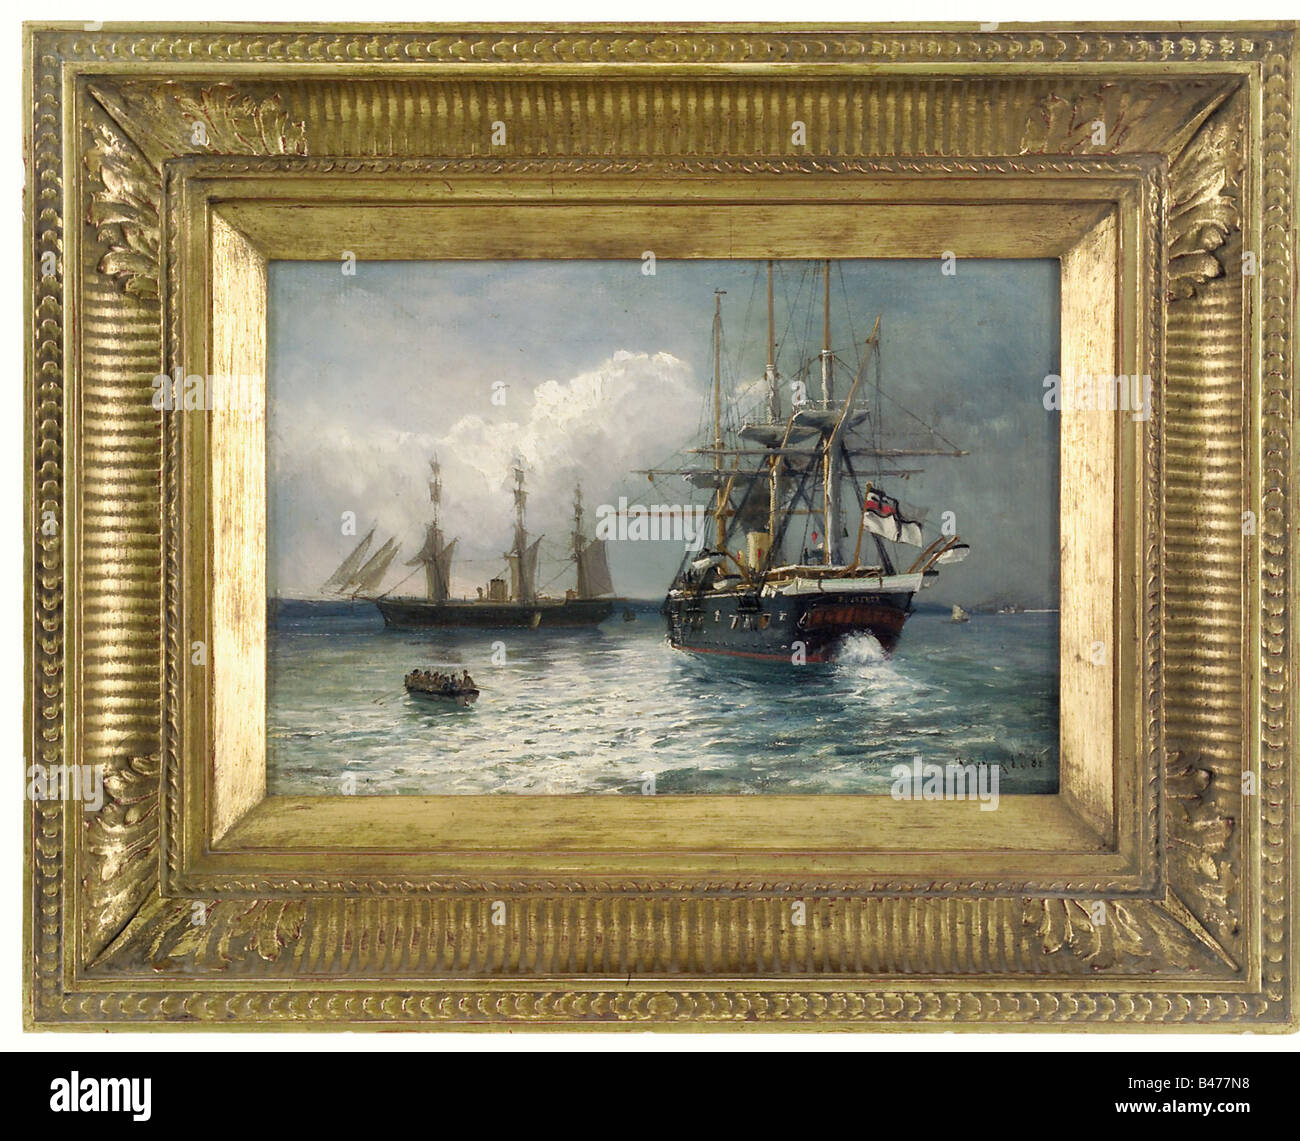 Richard Eschke (1859-1944), SMS Blücher in the Kiel Estuary. Oil on canvas. The Blücher is in the right foreground, heading for another ship with its stern toward the observer. There is a manned rowboat in the left foreground, and the coastline of the Kiel Estuary in the background. Gilded plaster frame. Framed dimensions: 46 x 37 cm. Eschke studied at the Berlin Academy, in Paris, and in England and studied with his father, who was also a naval painter. The Kaiser Panorama in Berlin, which he worked on with his father, is considered to be one of his , Artist's Copyright has not to be cleared Stock Photo